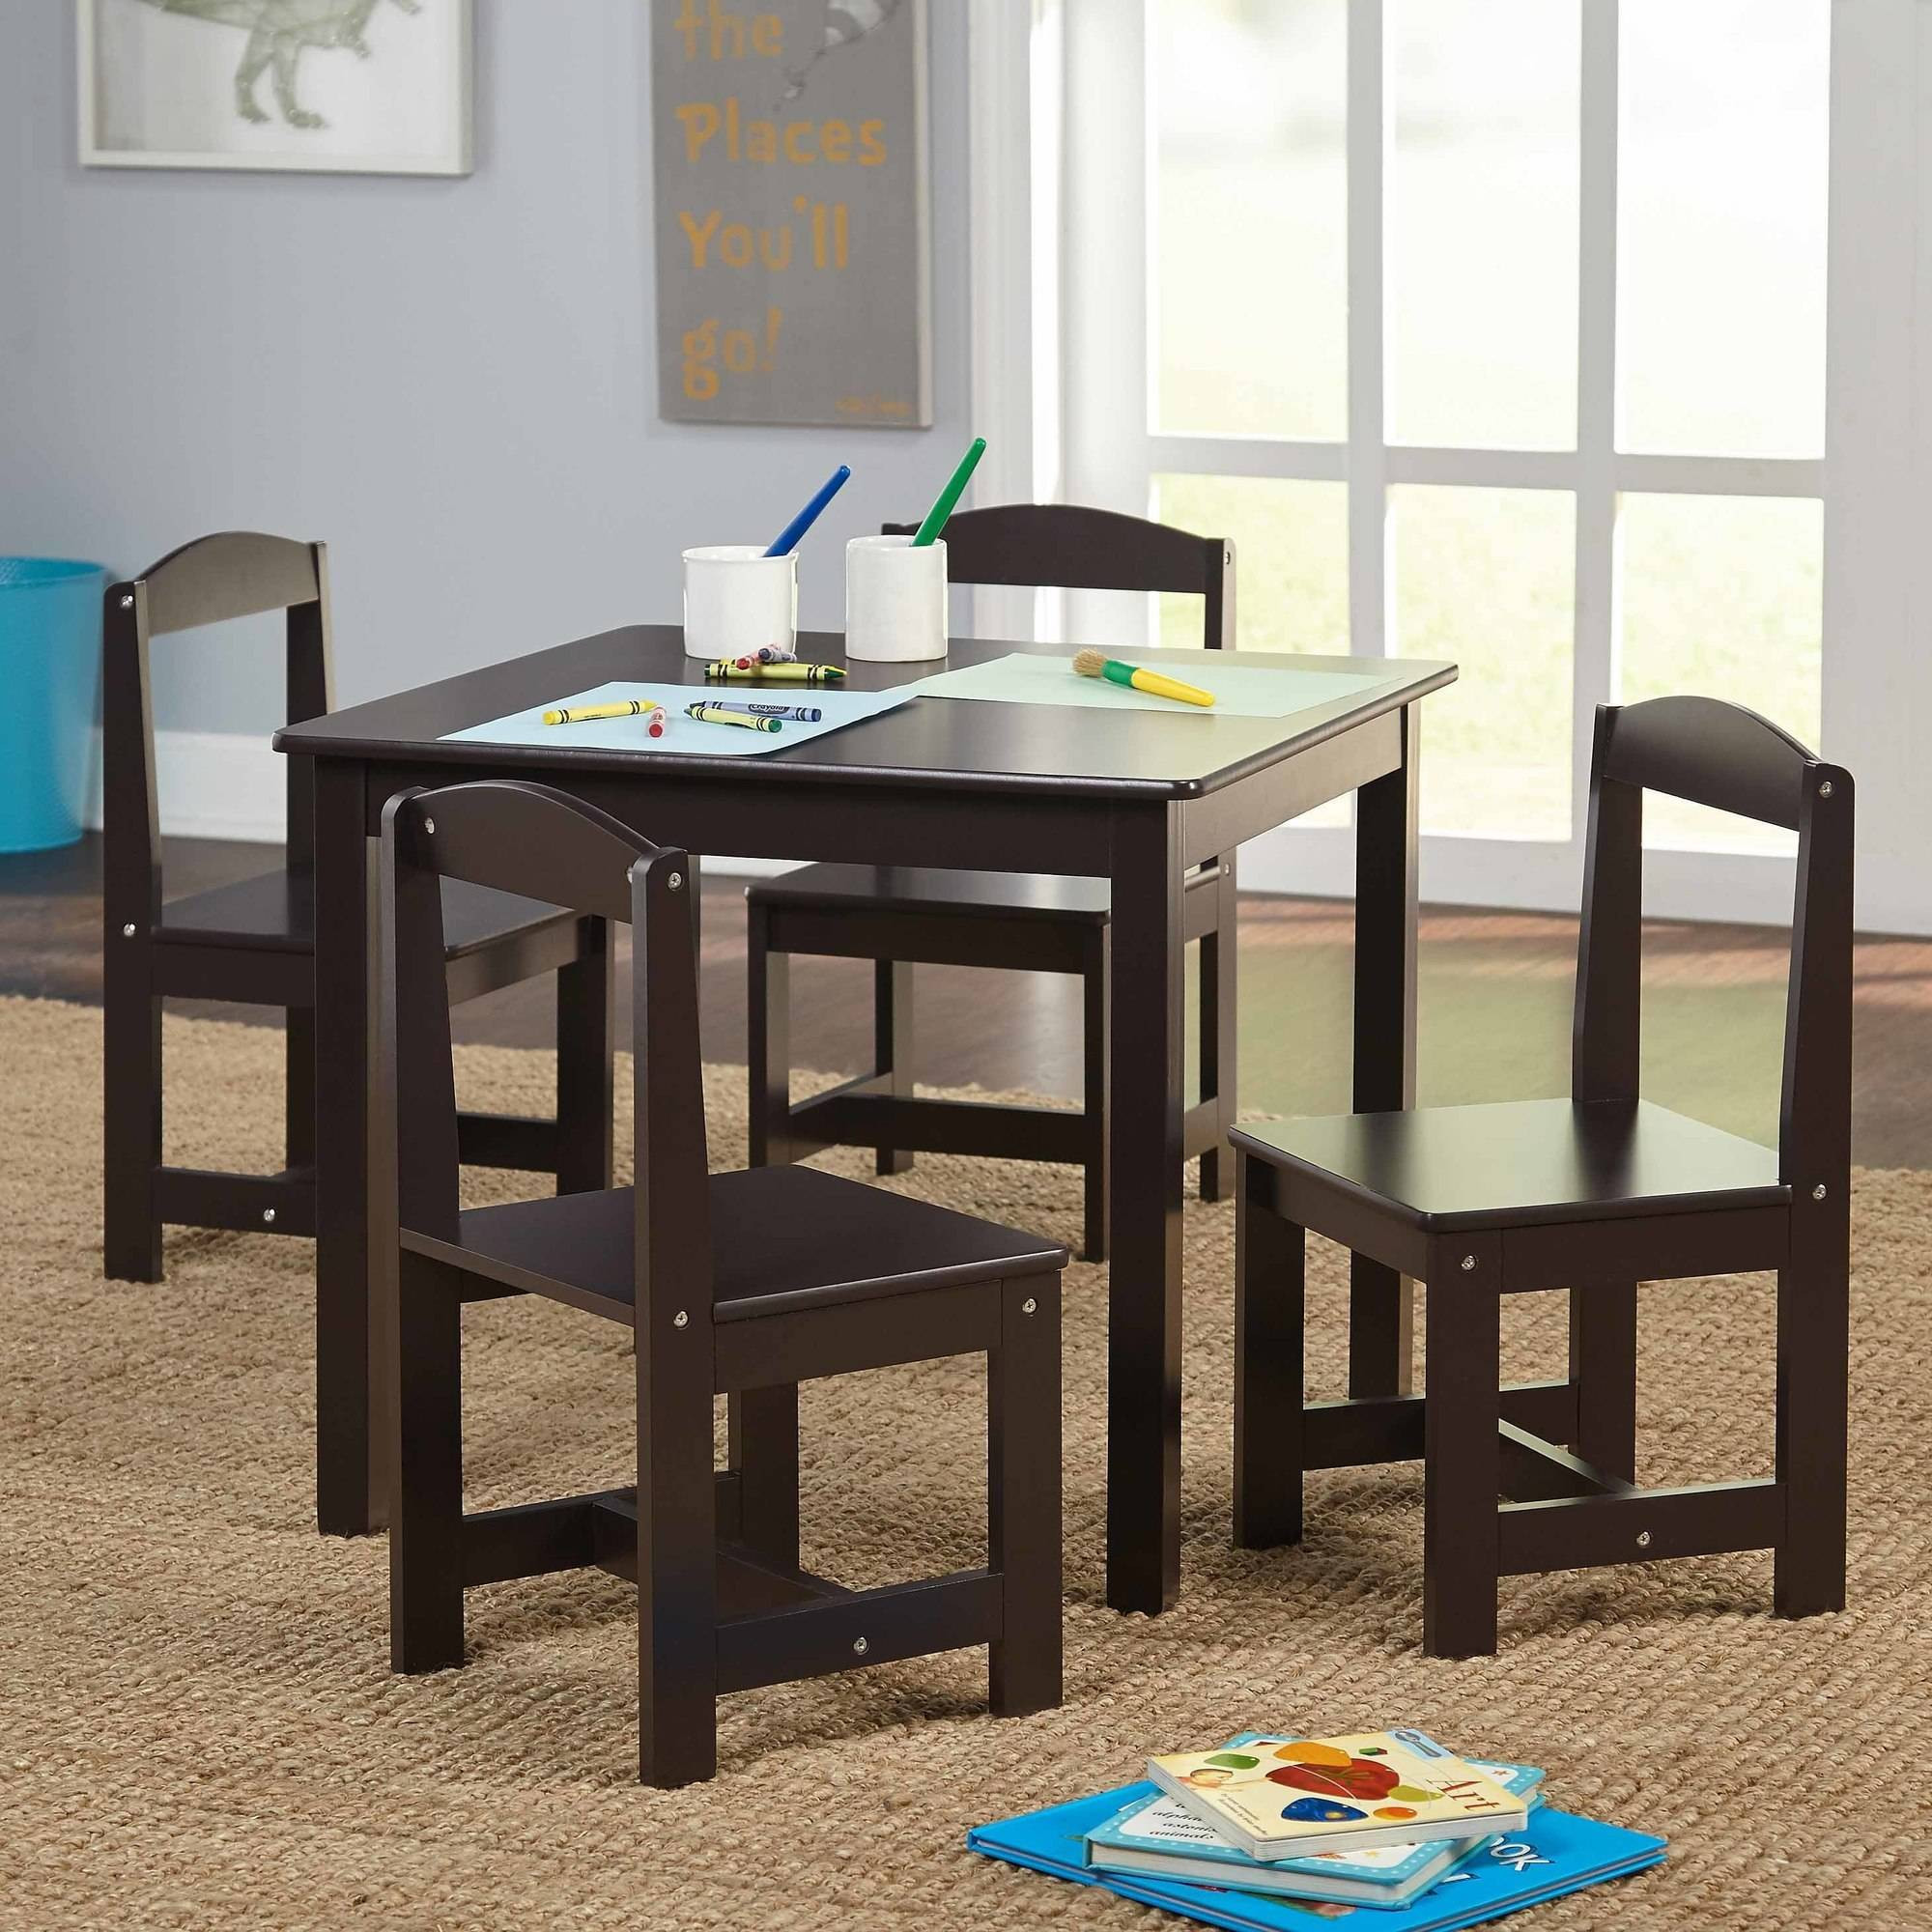 Walmart Kids Table Set
 Hayden Kids 5 Piece Table and Chairs Set Toddler Wood